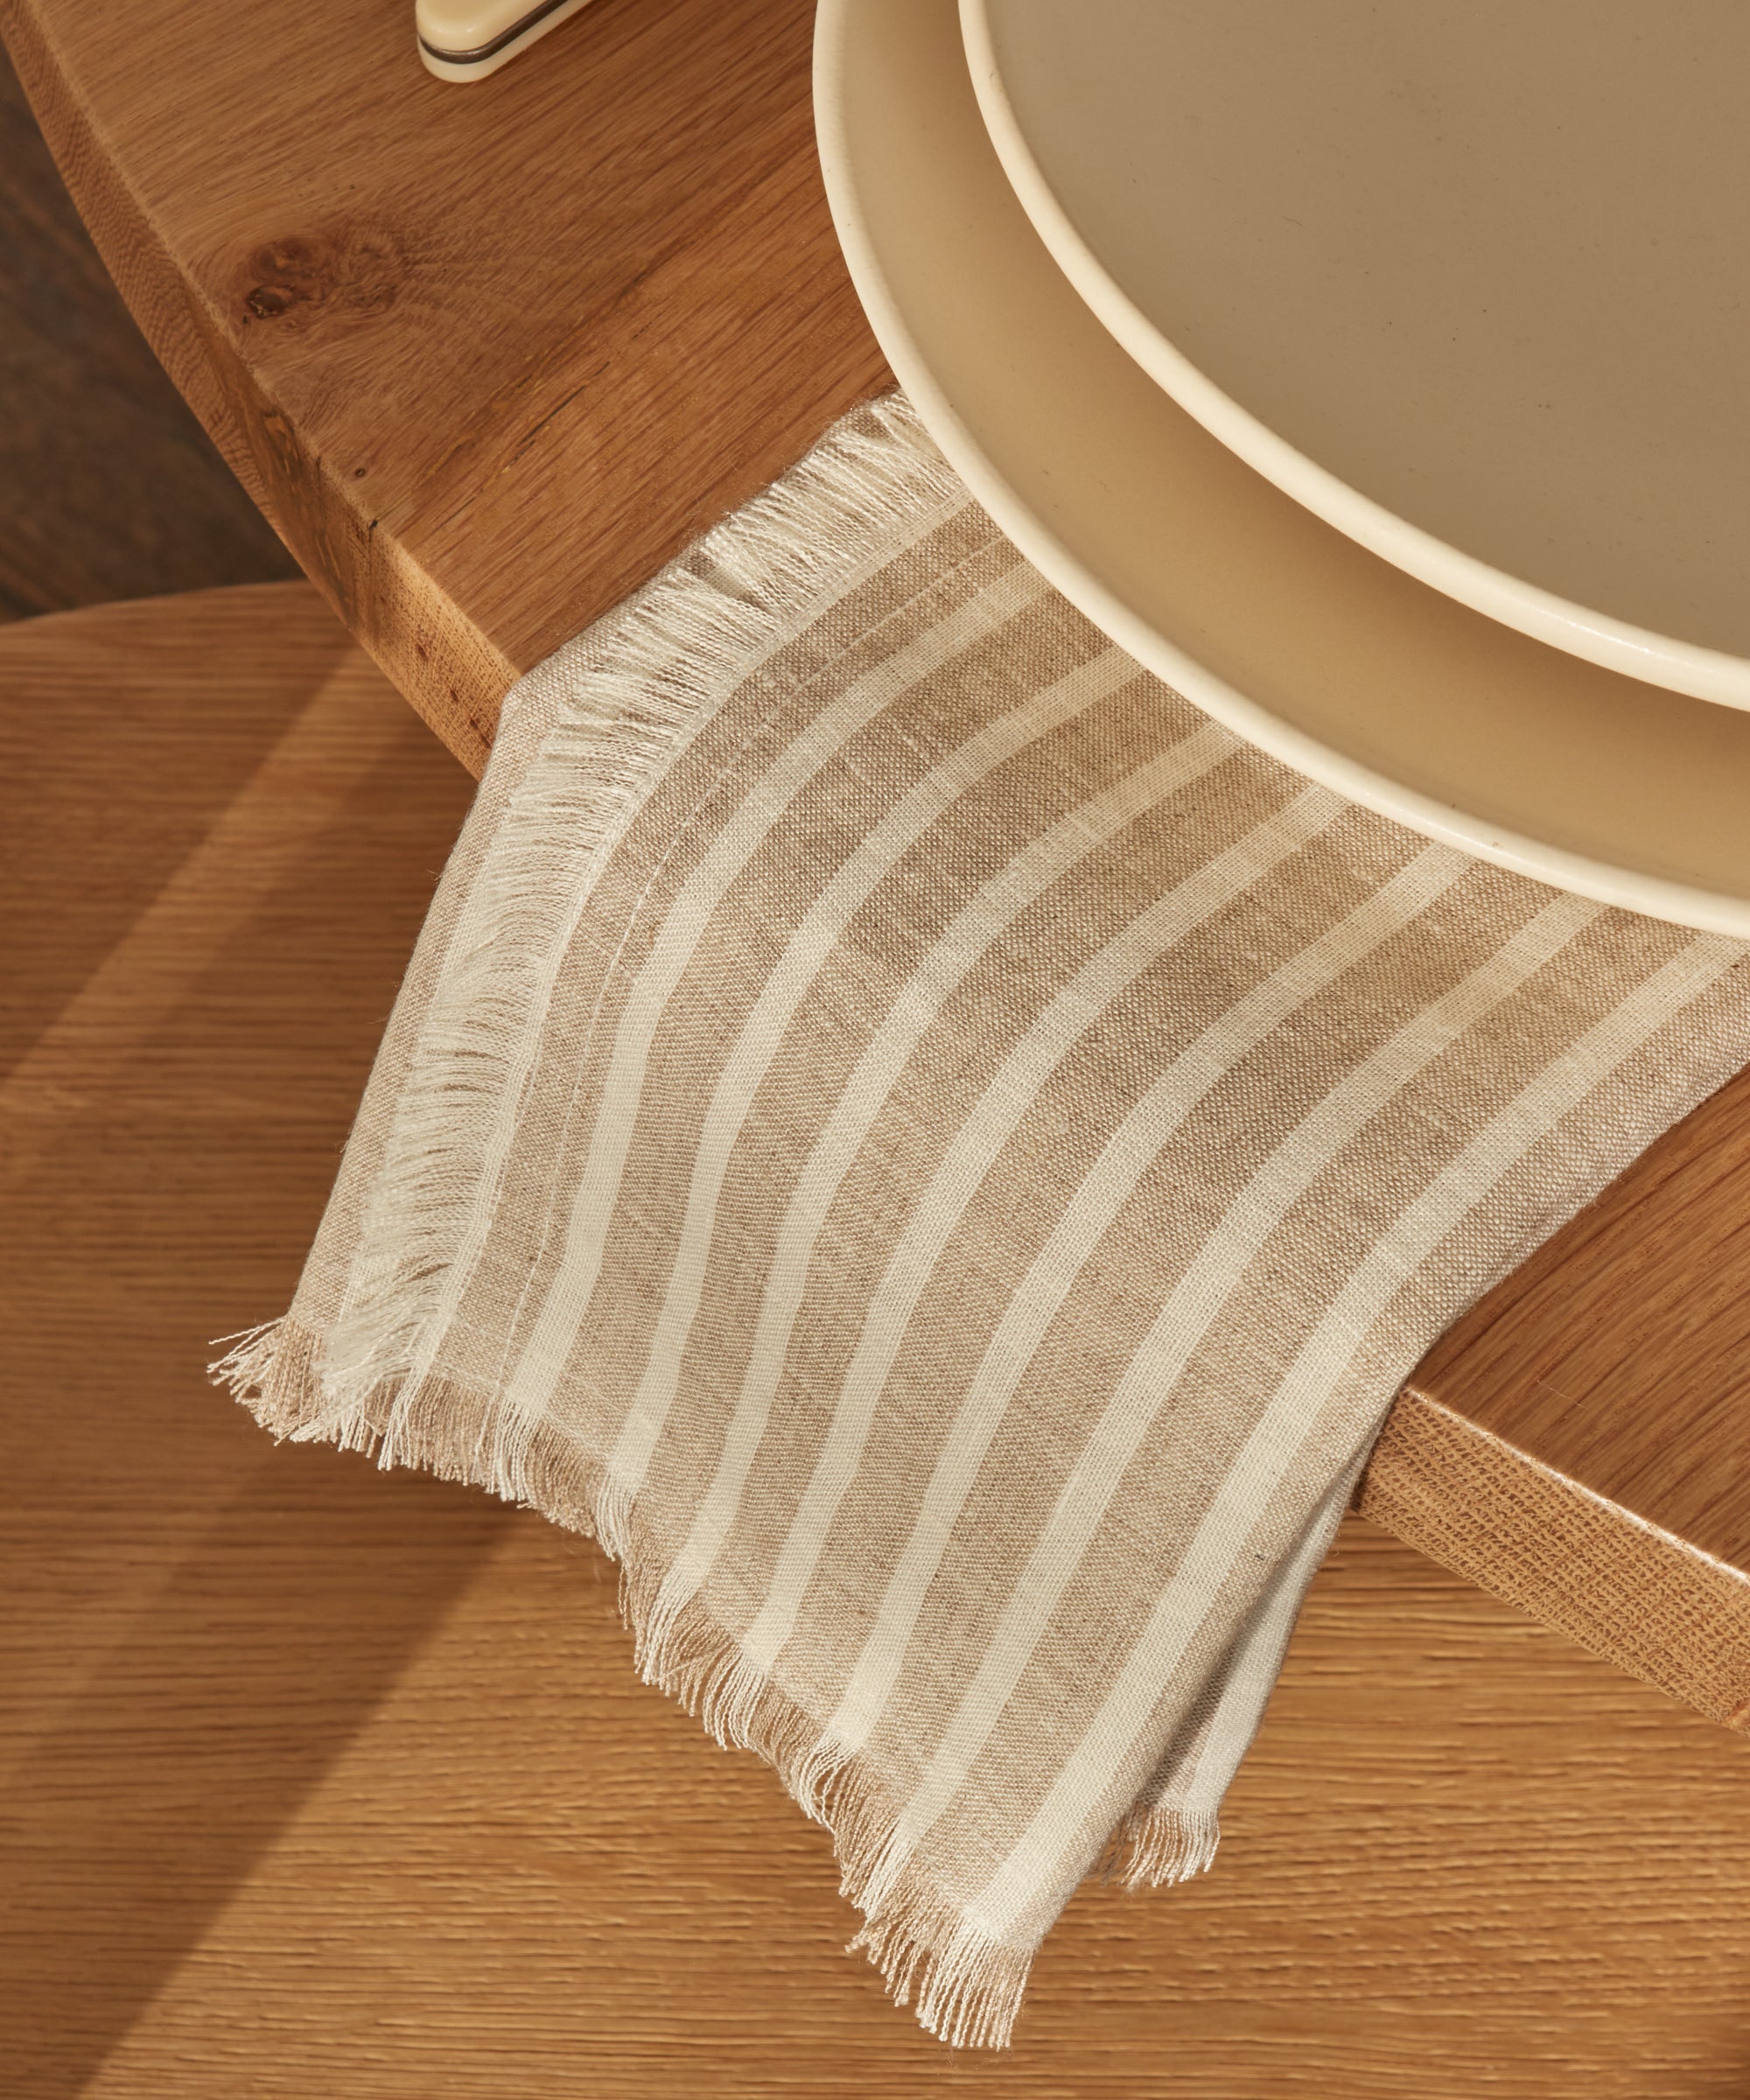 Upgrade Your Dining Experience with Cotton Table Napkins Cloth - Fringe  Dinner Napkins with Rings - Elegant Rustic Frayed Edge Napkins for